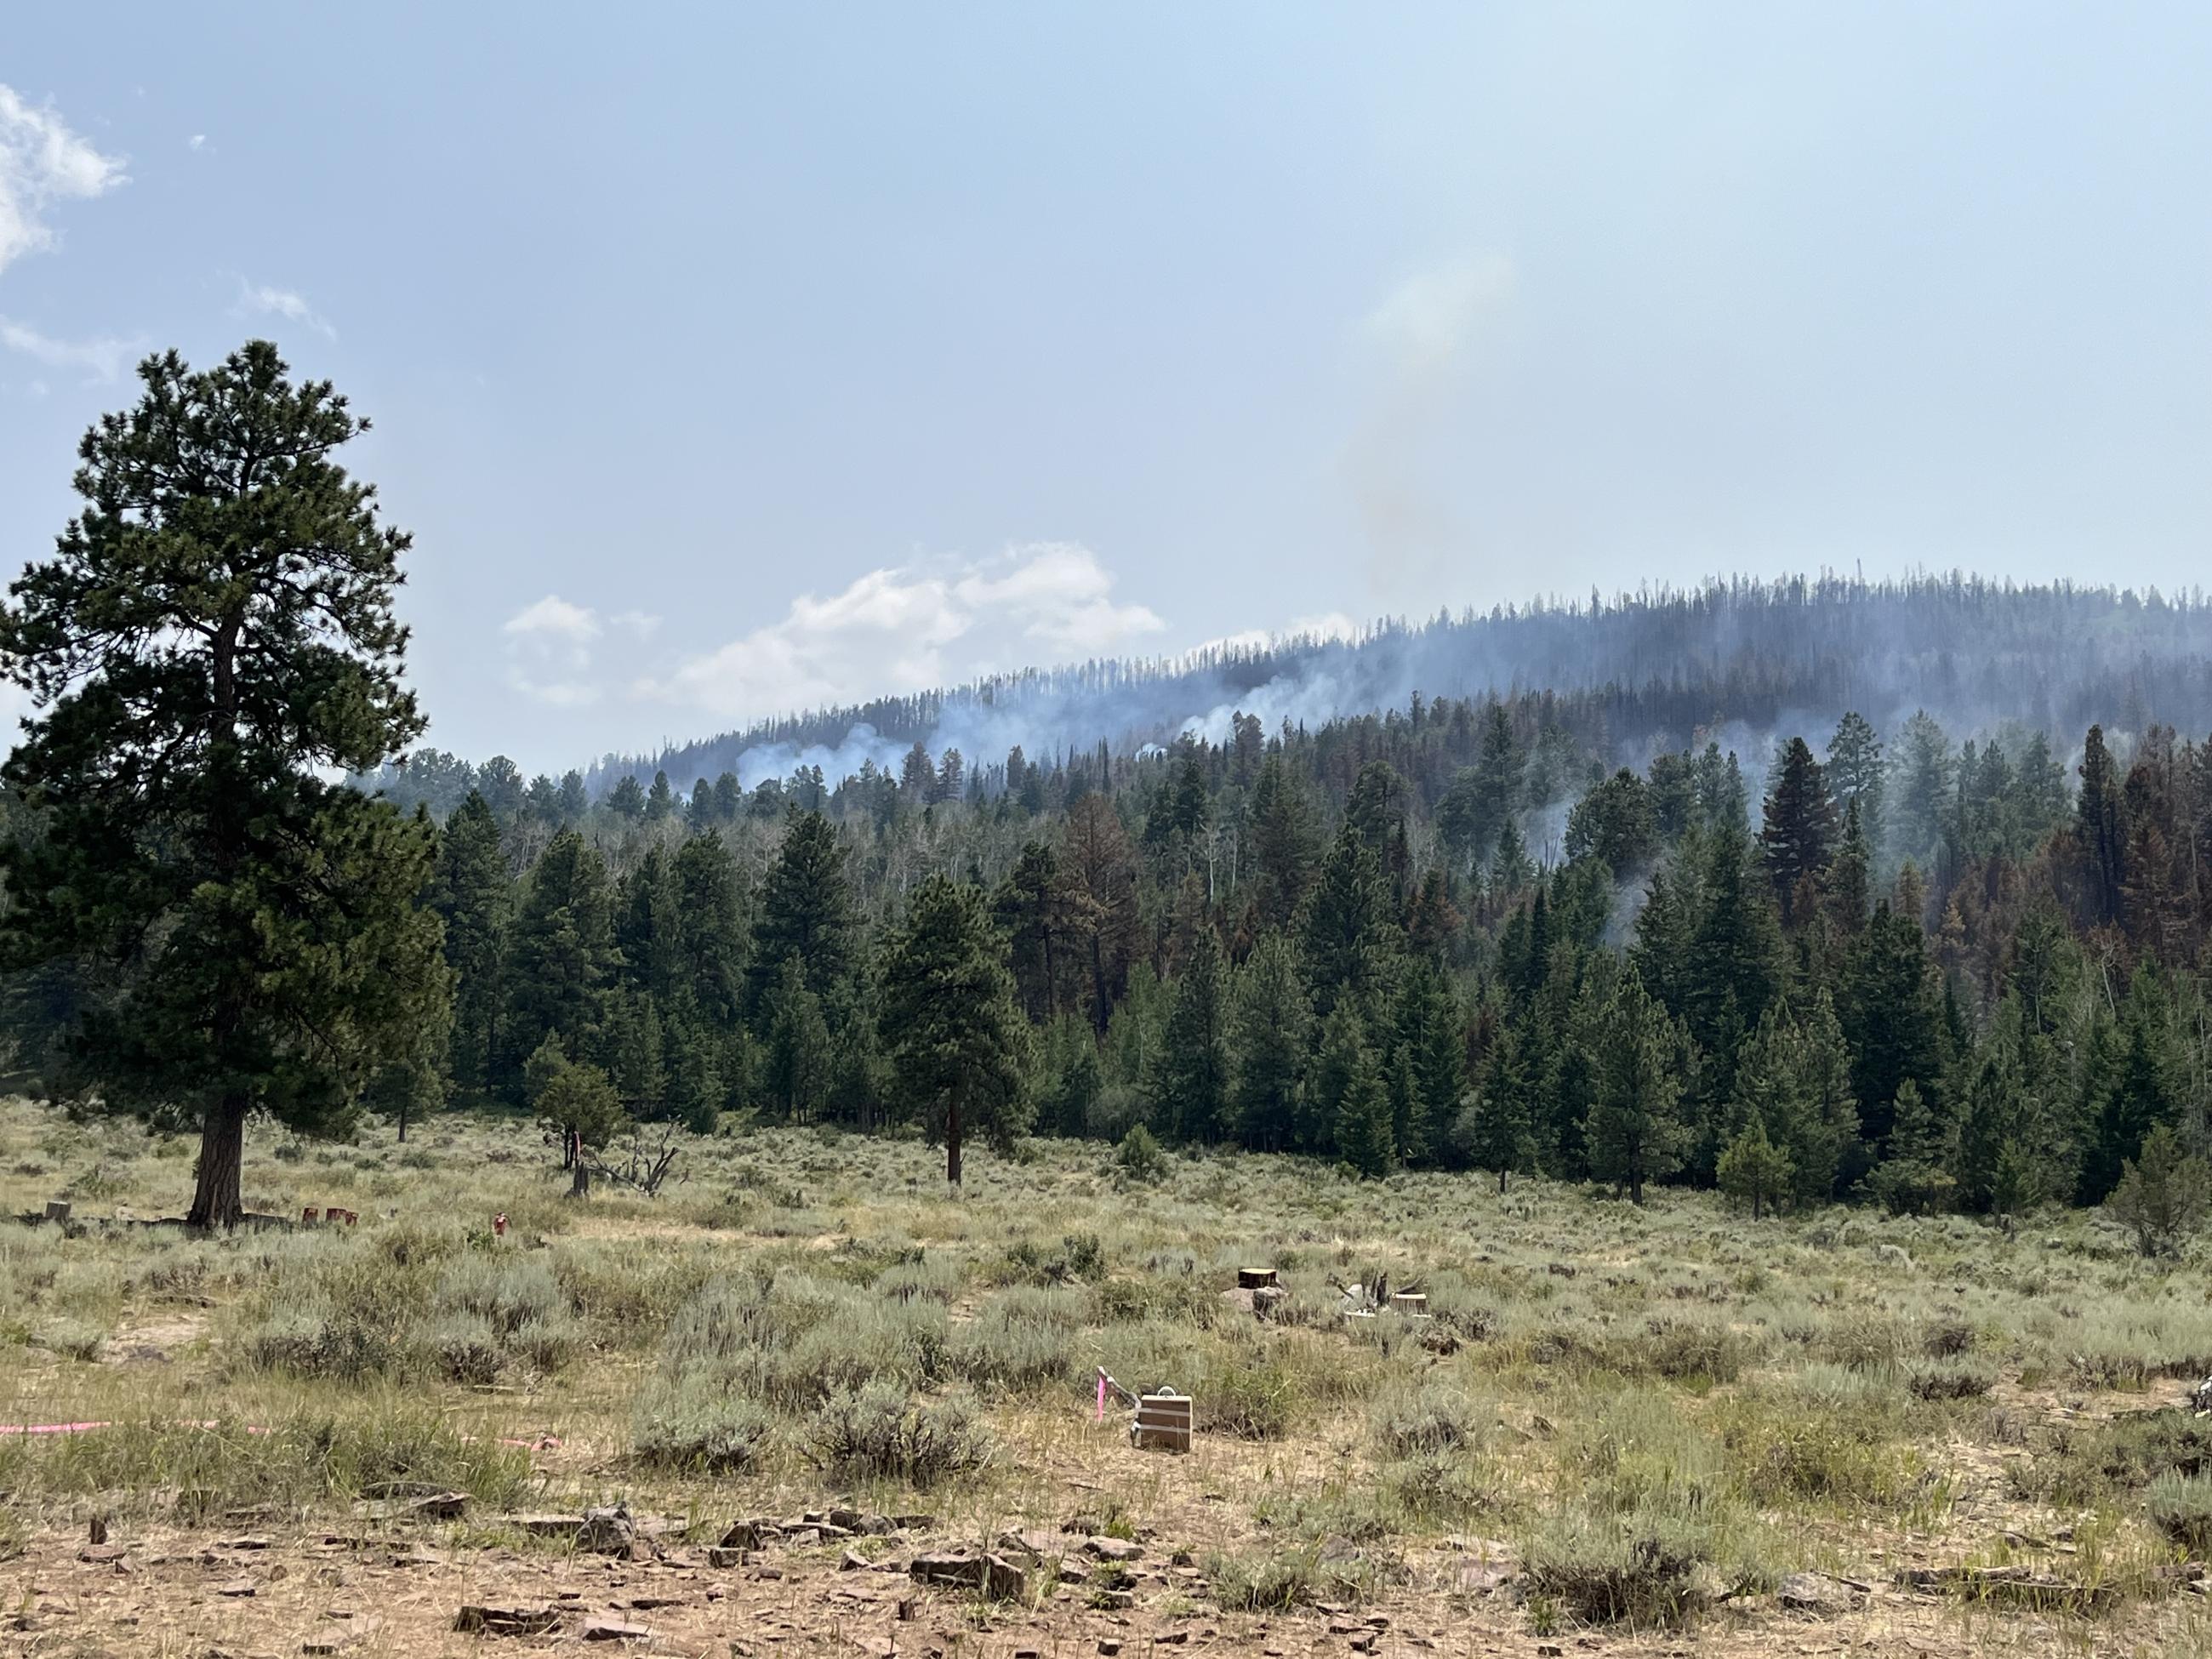 Firing operations in the northwest portion of the fire.